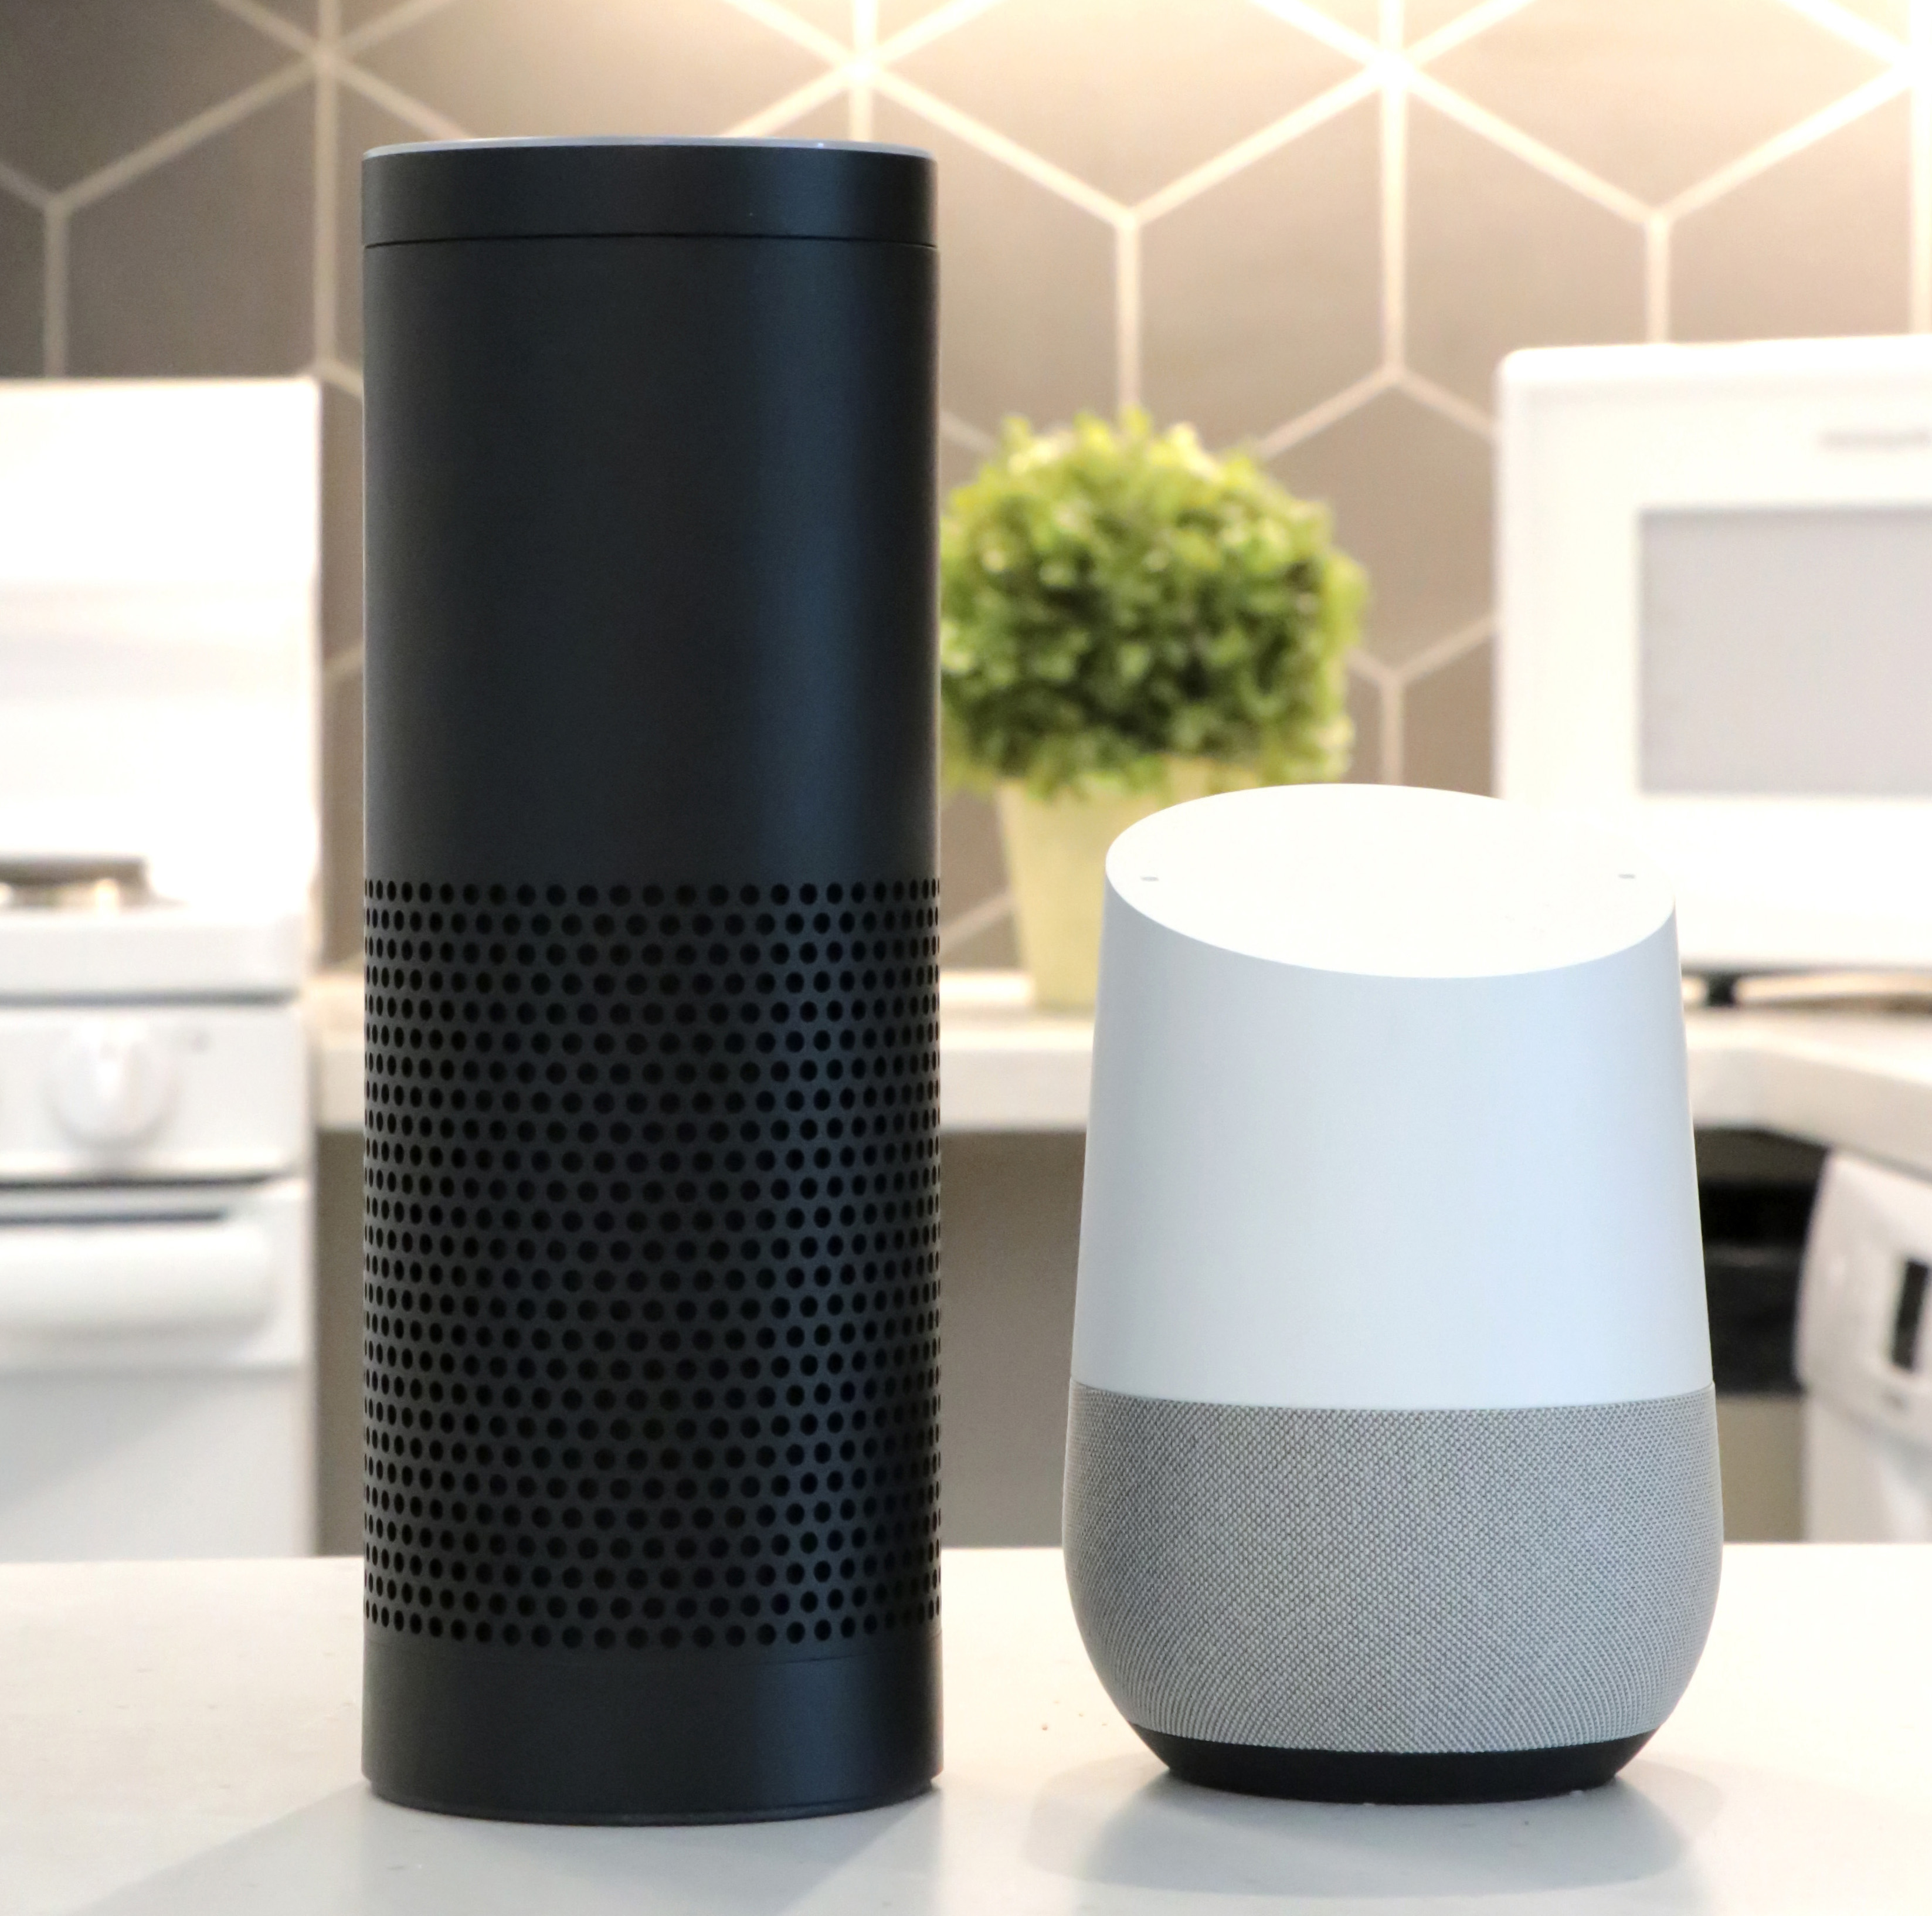 echo and google home